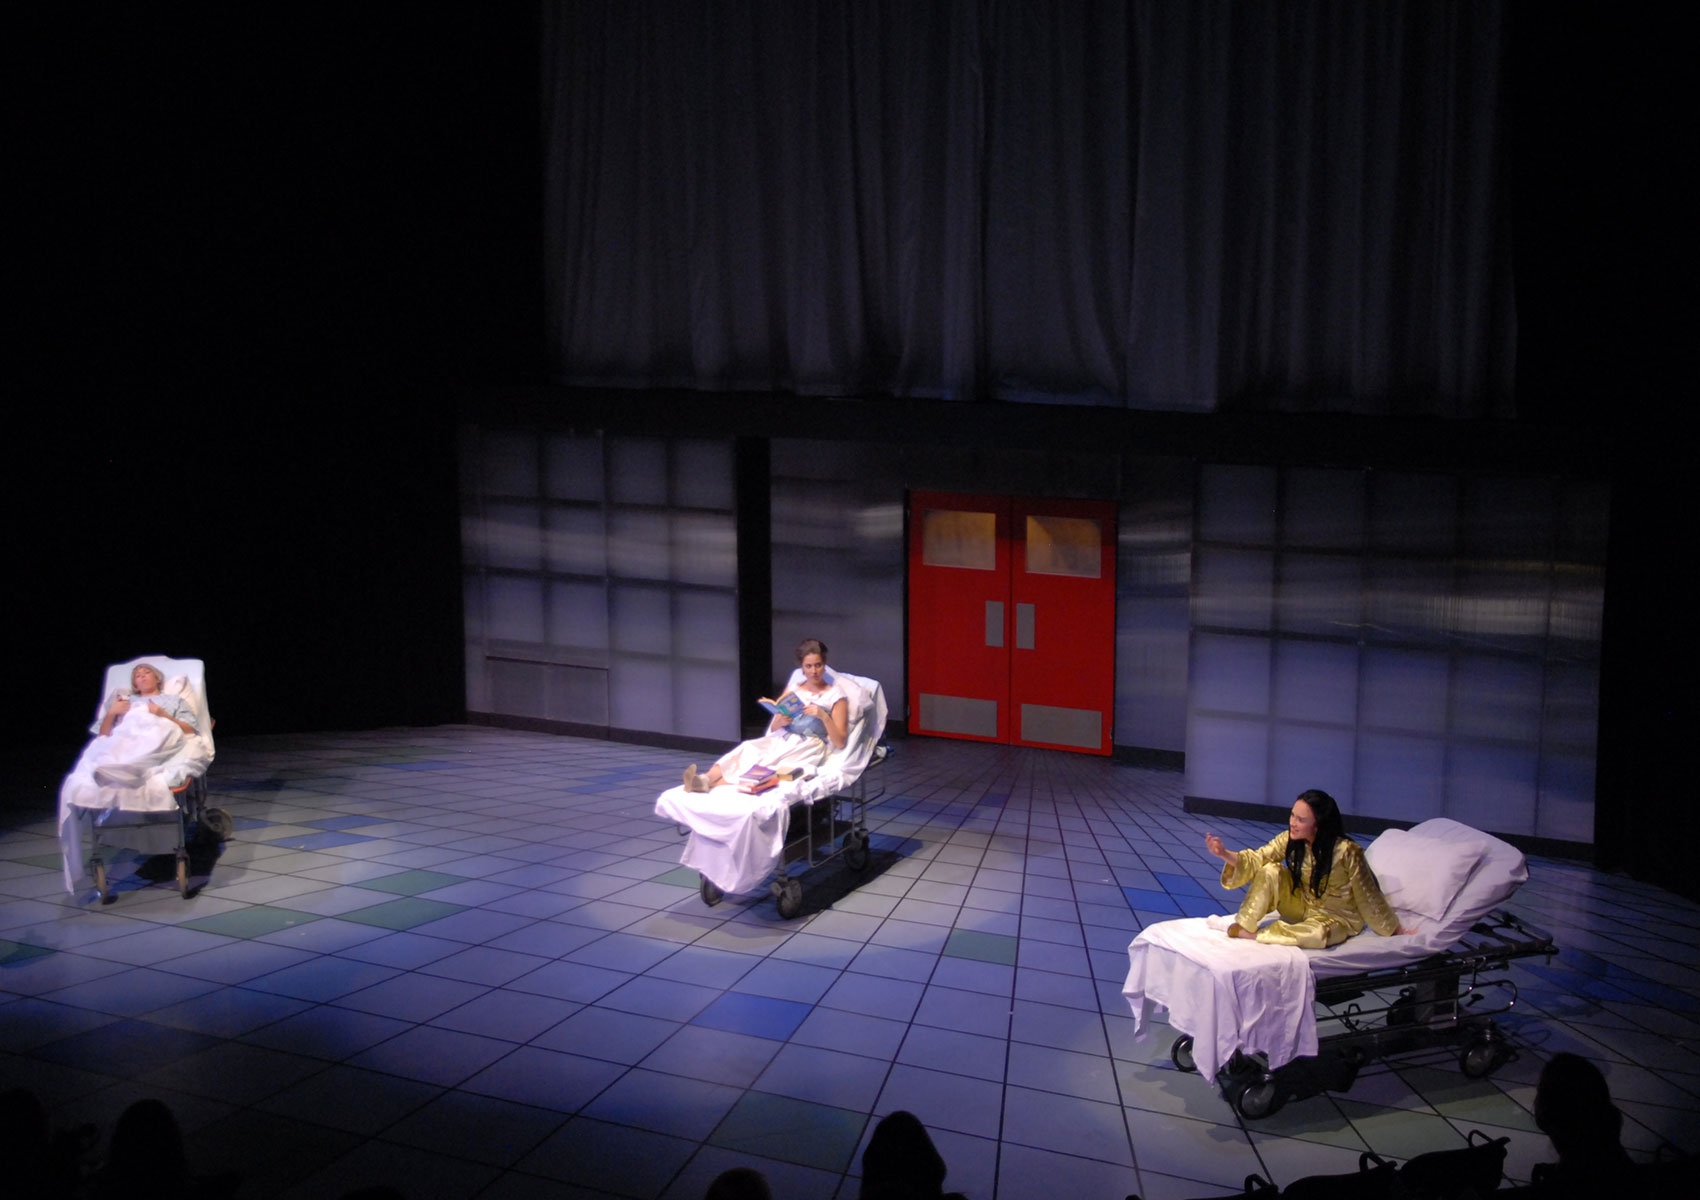 Three hospital beds are spread far apart on stage with a woman occupying each. The woman in the bed farthest left is laying, looking toward the audience. The woman in the middle bed is sitting up, reading. The woman in the bed farthest right is sitting up and gesturing.